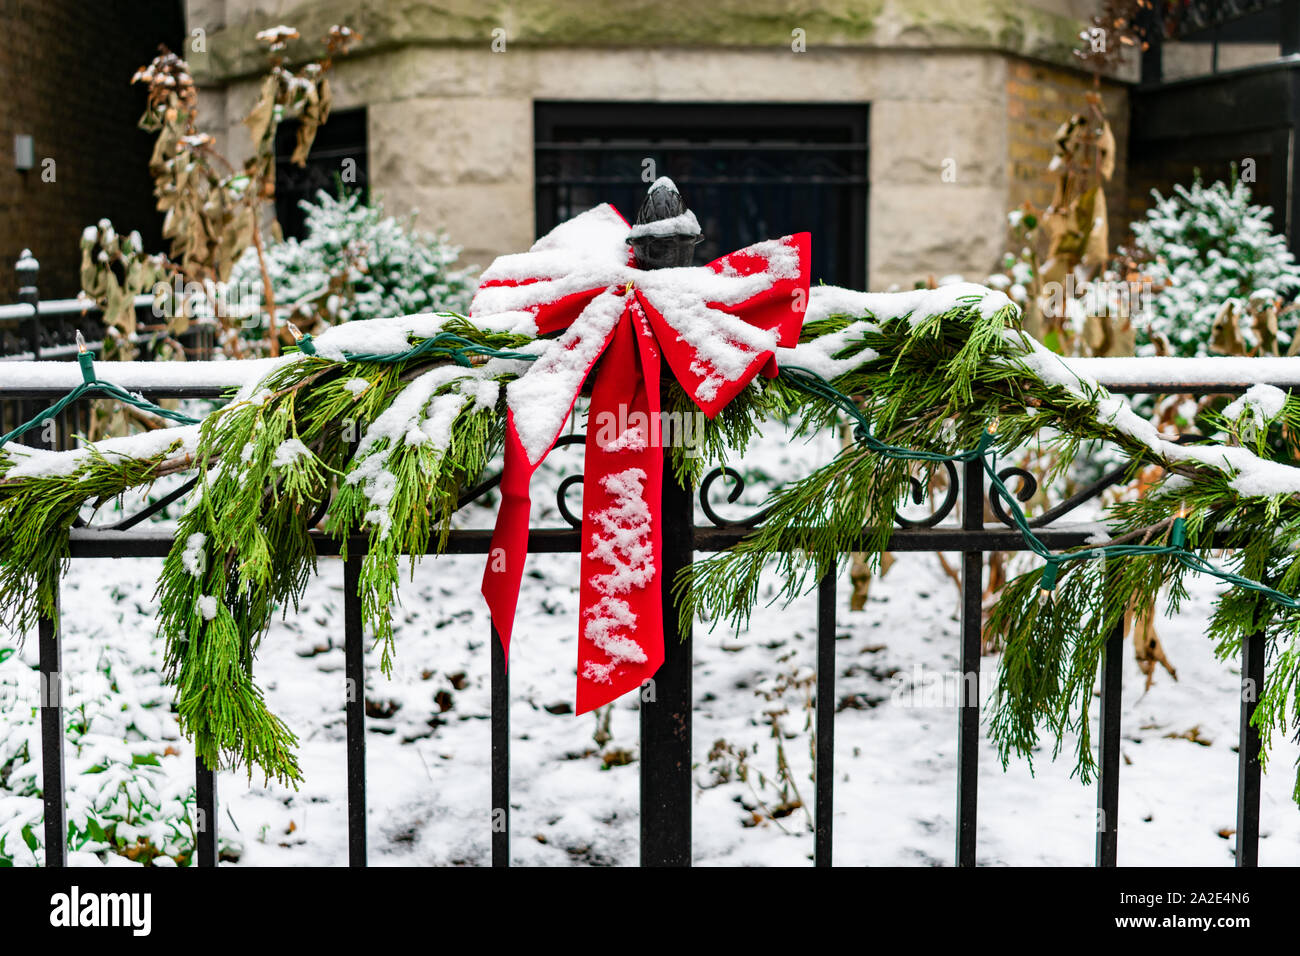 Red Holiday Bow on a Home Garden Fence wrapped with a Pine Garland and Lights during Winter with Snow Stock Photo